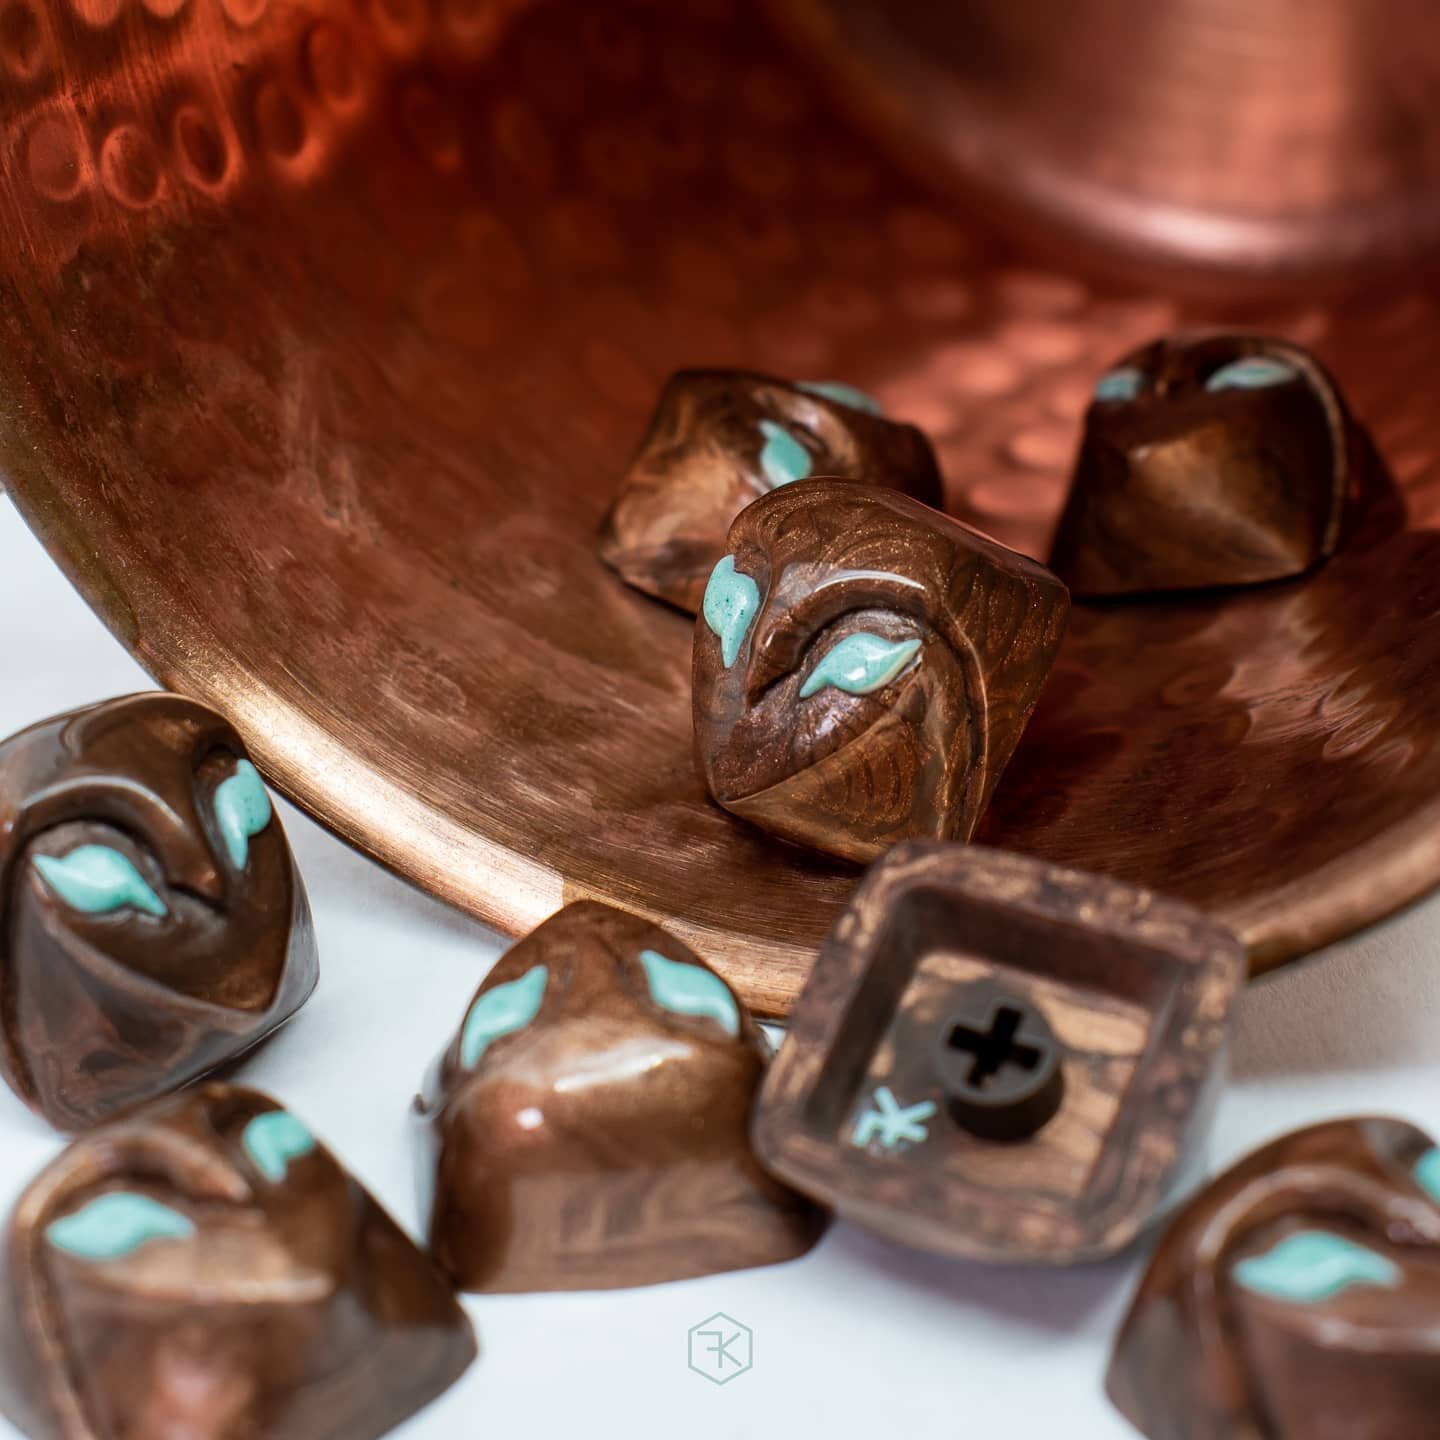 𝑺𝒎𝒆𝒍𝒕𝒊𝒏𝒈 𝑷𝒐𝒊𝒏𝒕⁣
⁣
Presenting colorway 2 of 4 for the Copper Mega Sale.⁣
⁣
For this colorway, I tried something I've never done before: marbling and cold casting! These caps feature UV-reactive eyes, and a cold-casted marbling of two tone